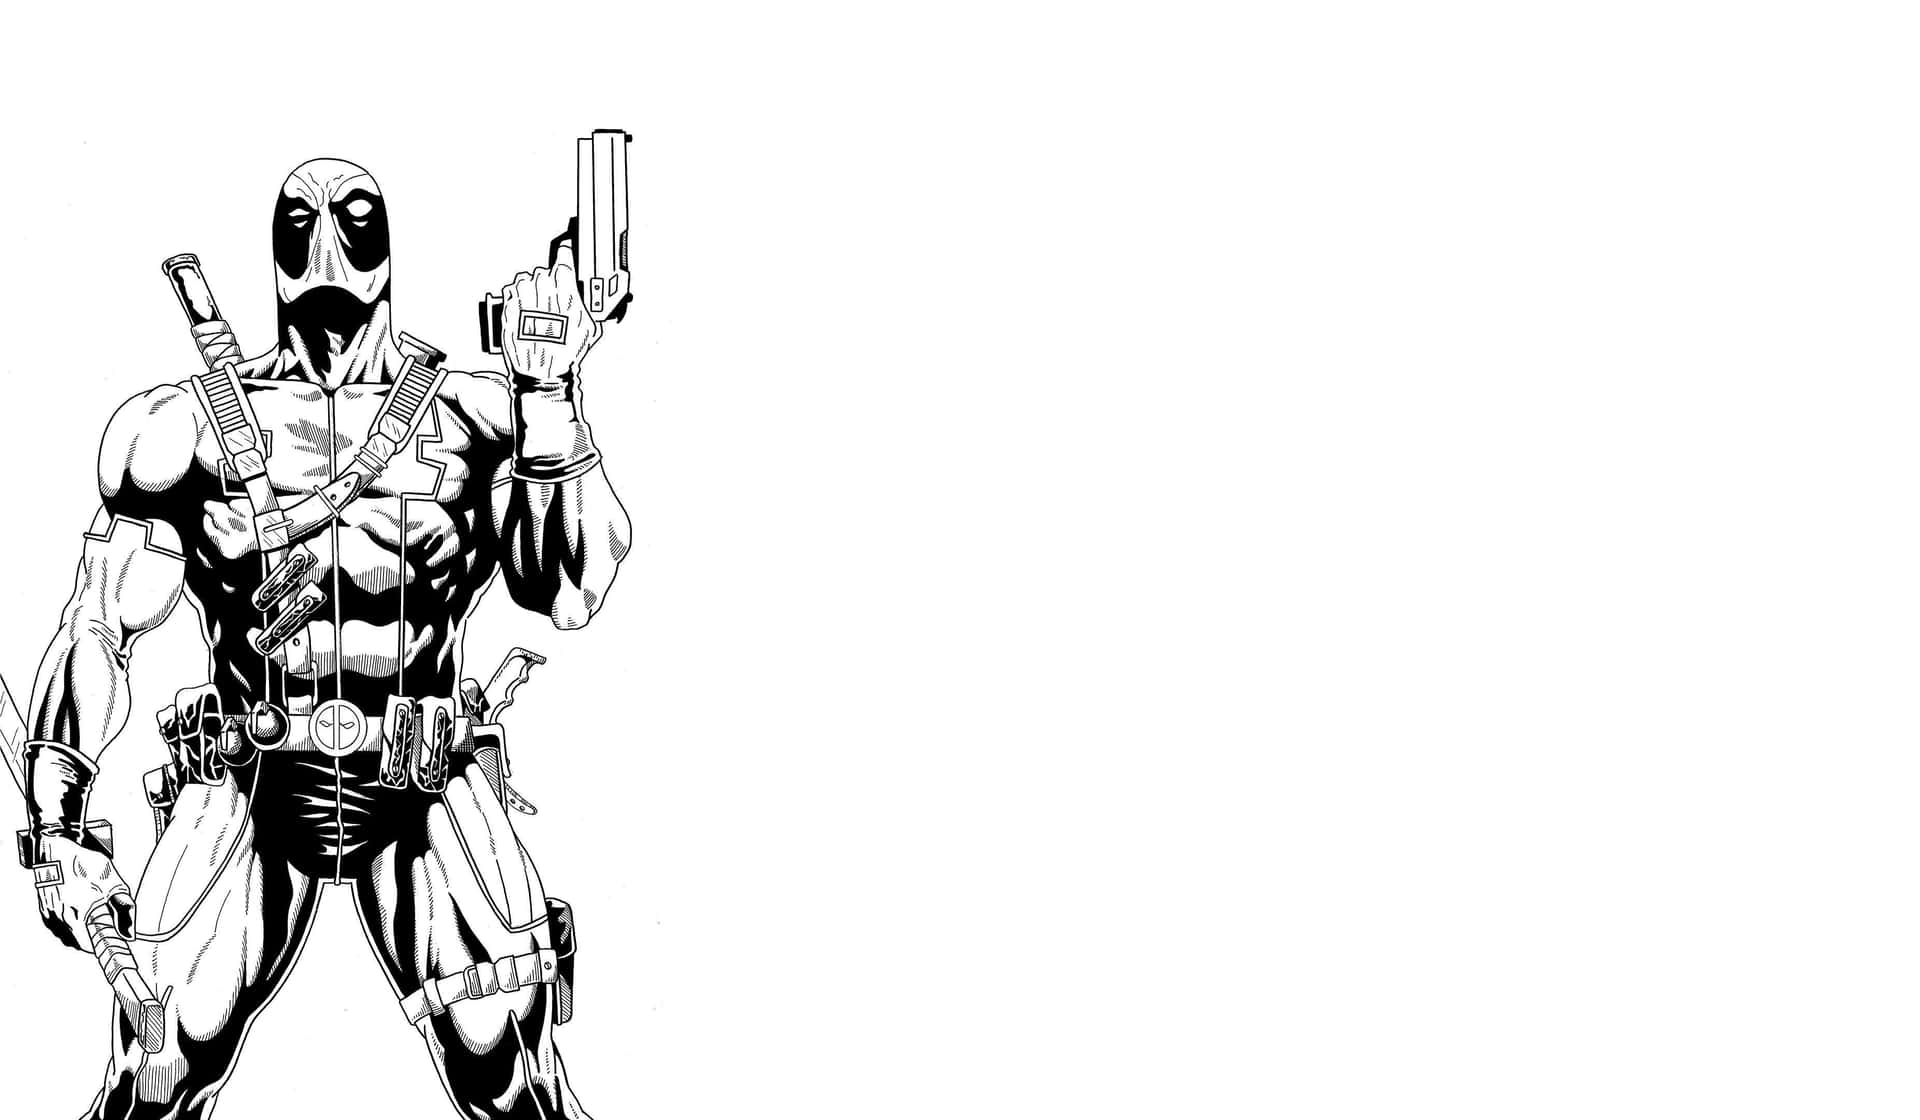 Dynamic Duel in a Black and White Comic Wallpaper